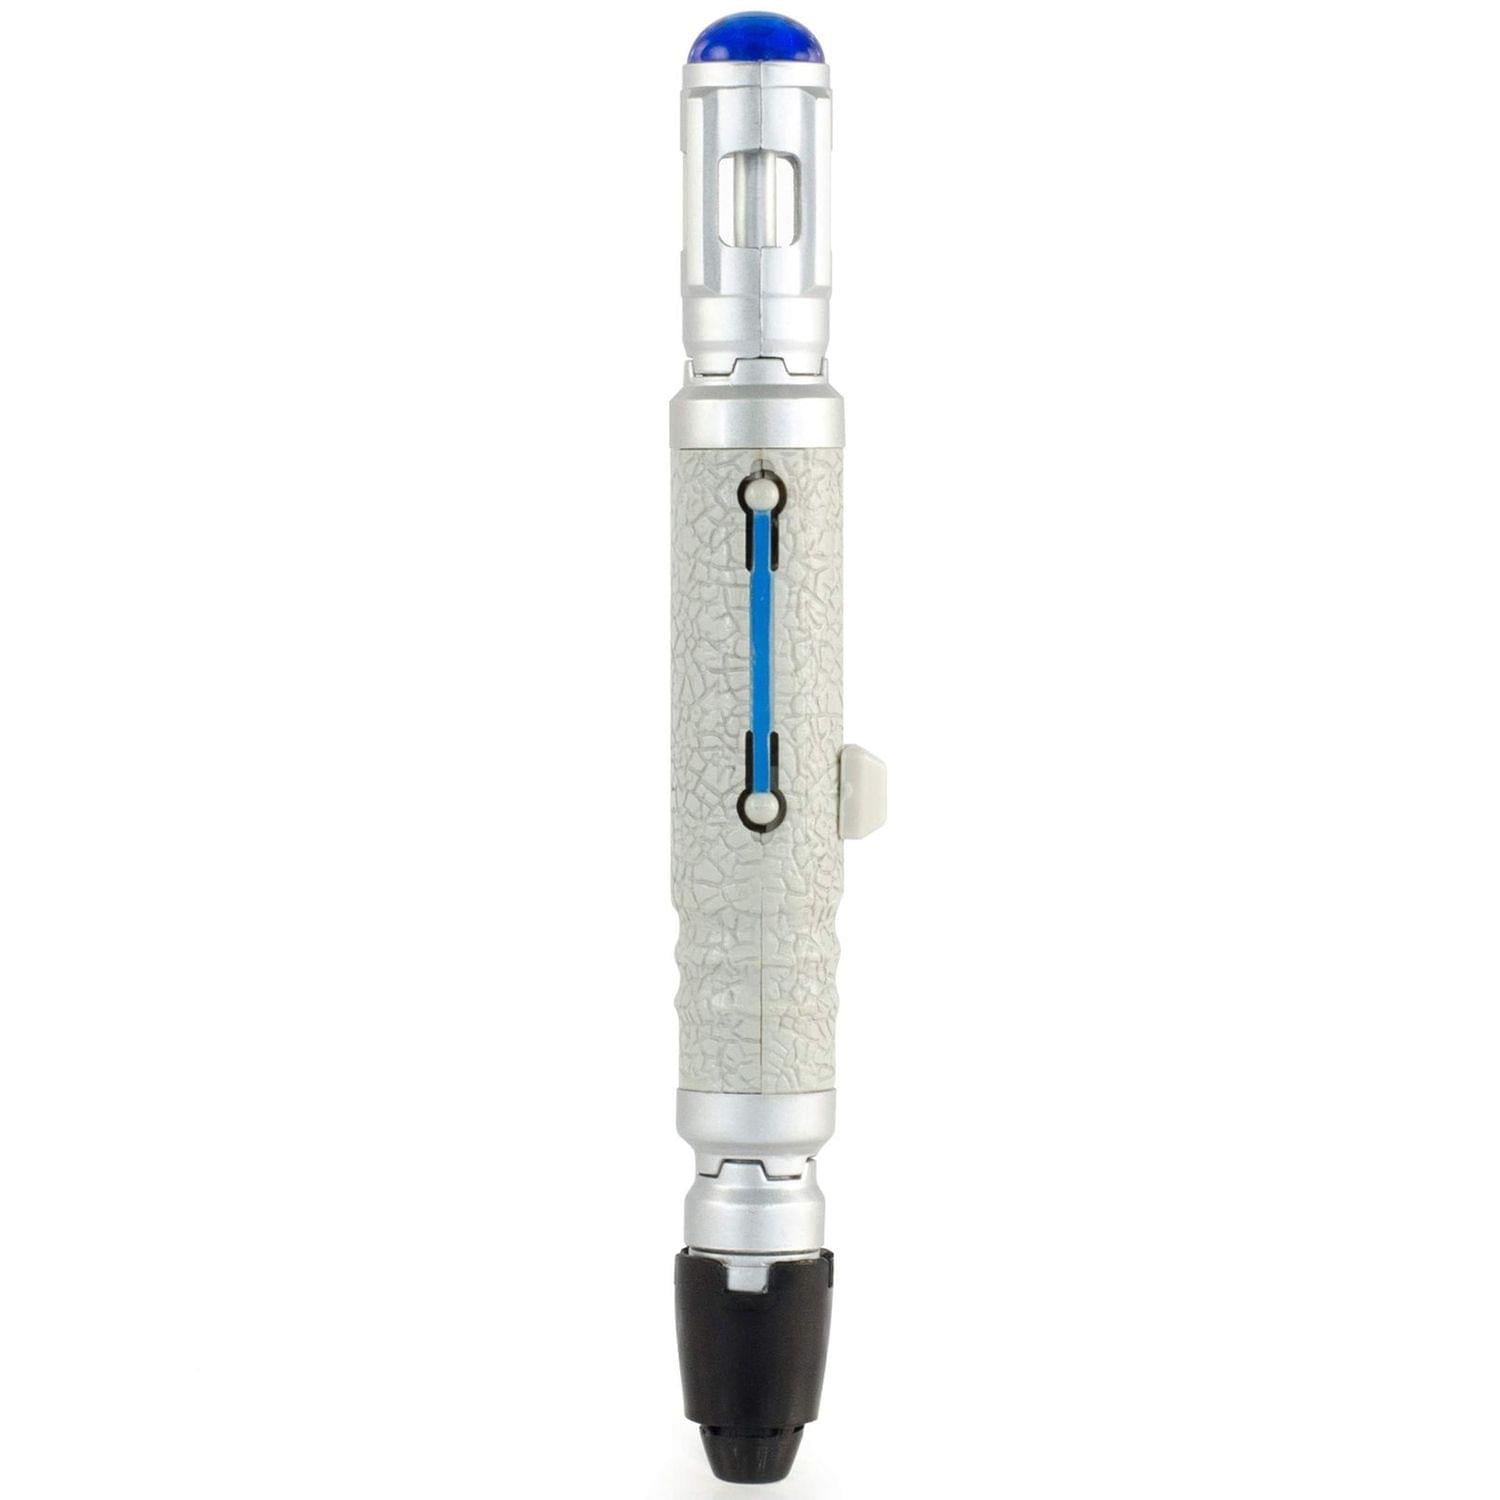 DOCTOR WHO 10th Sonic Screwdriver LED TORCH 1/2 DISPO 